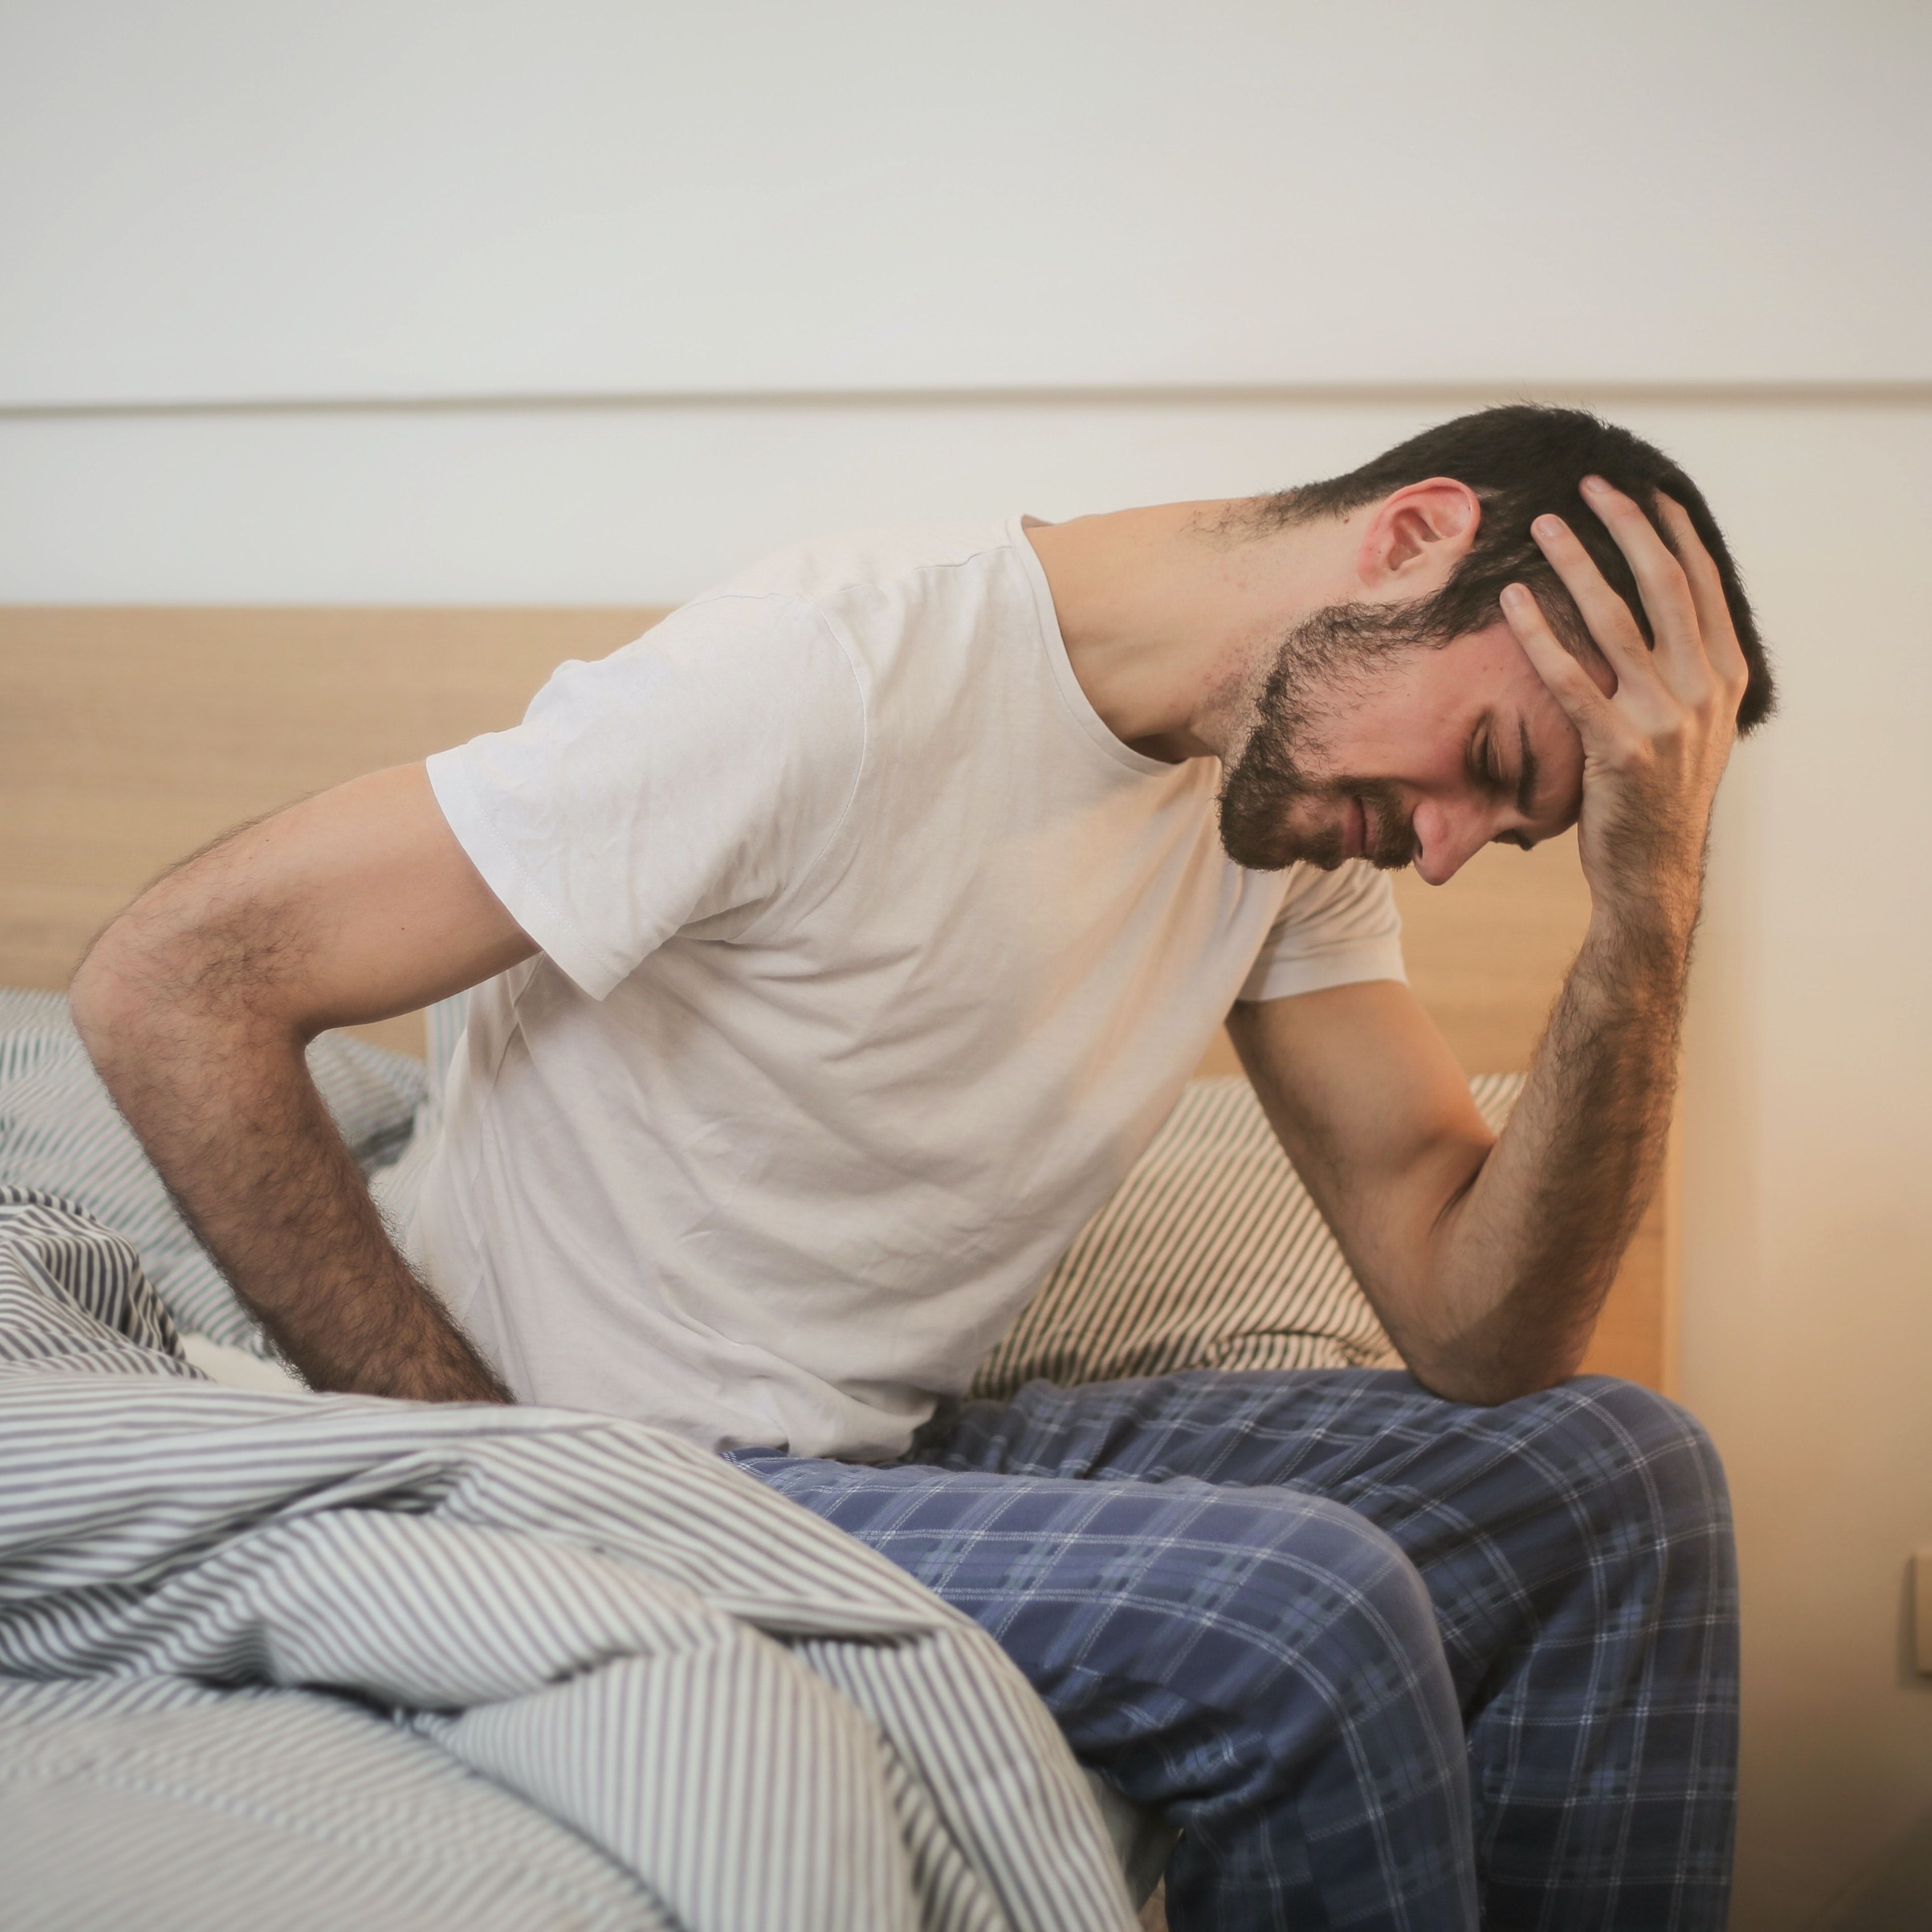 Chronic Migraine and Insomnia Have a Strong Bidirectional Relationship, Study Finds